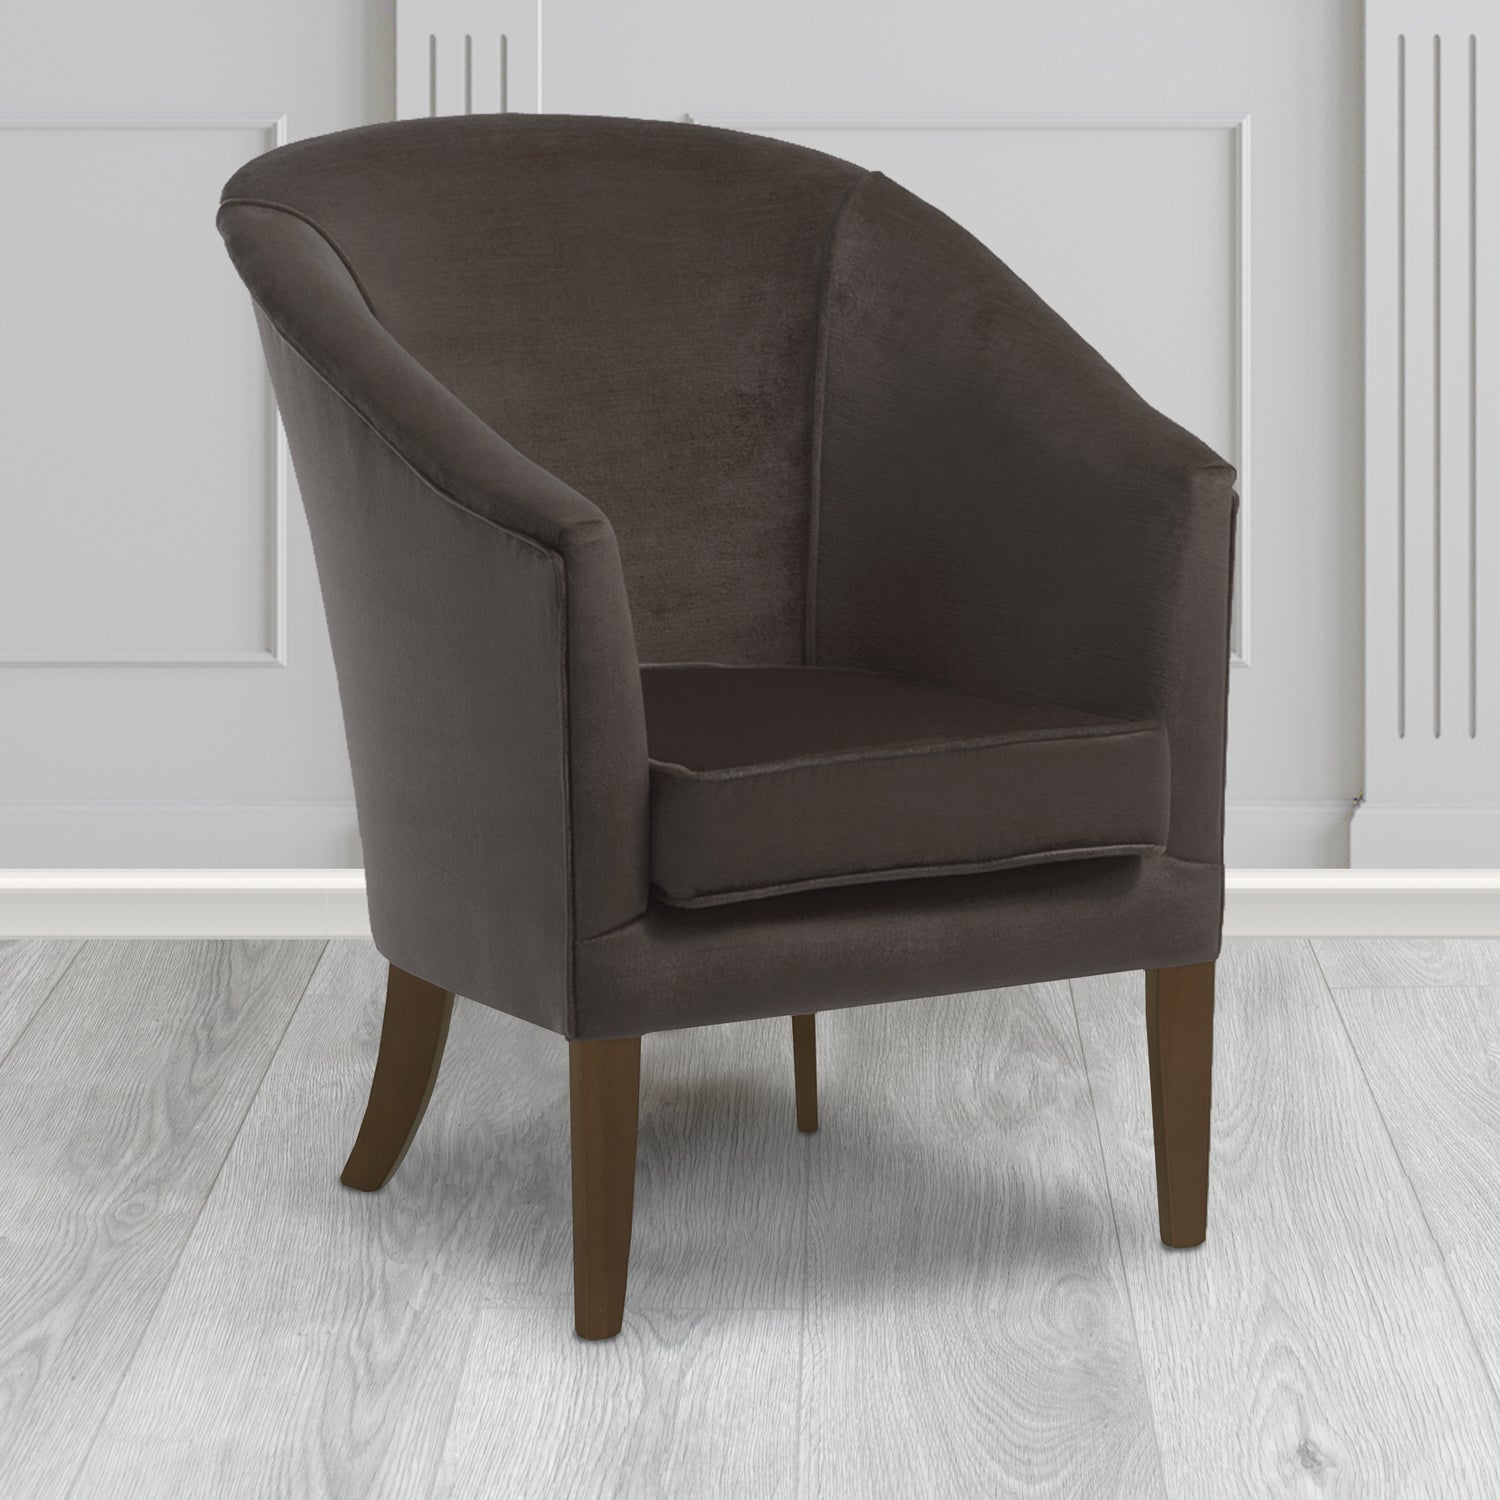 Burton Tub Chair in Noble 903 Charcoal Crib 5 Velvet Fabric - Water Resistant - The Tub Chair Shop